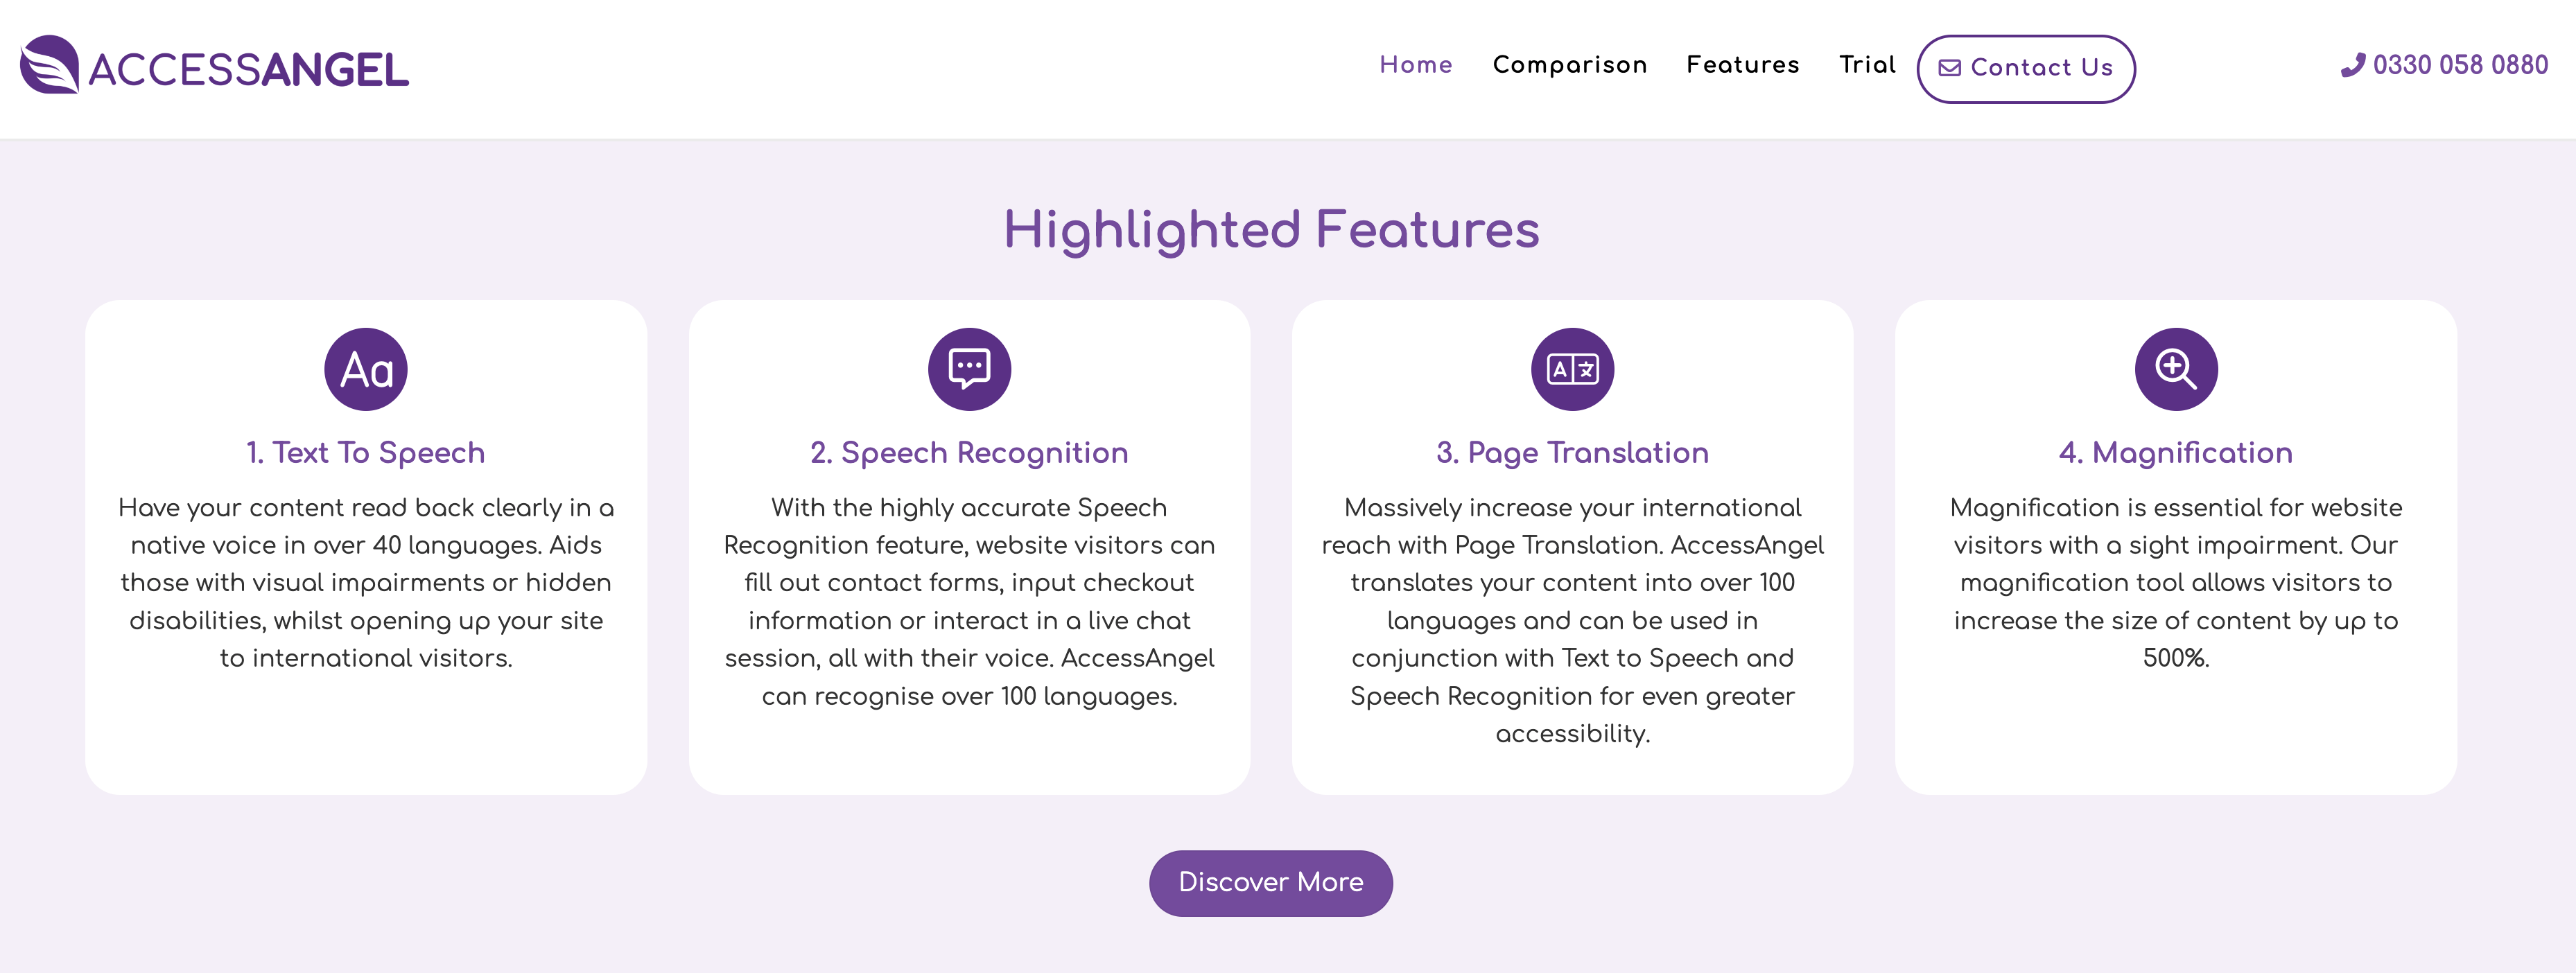 AccessAngel Features and Services